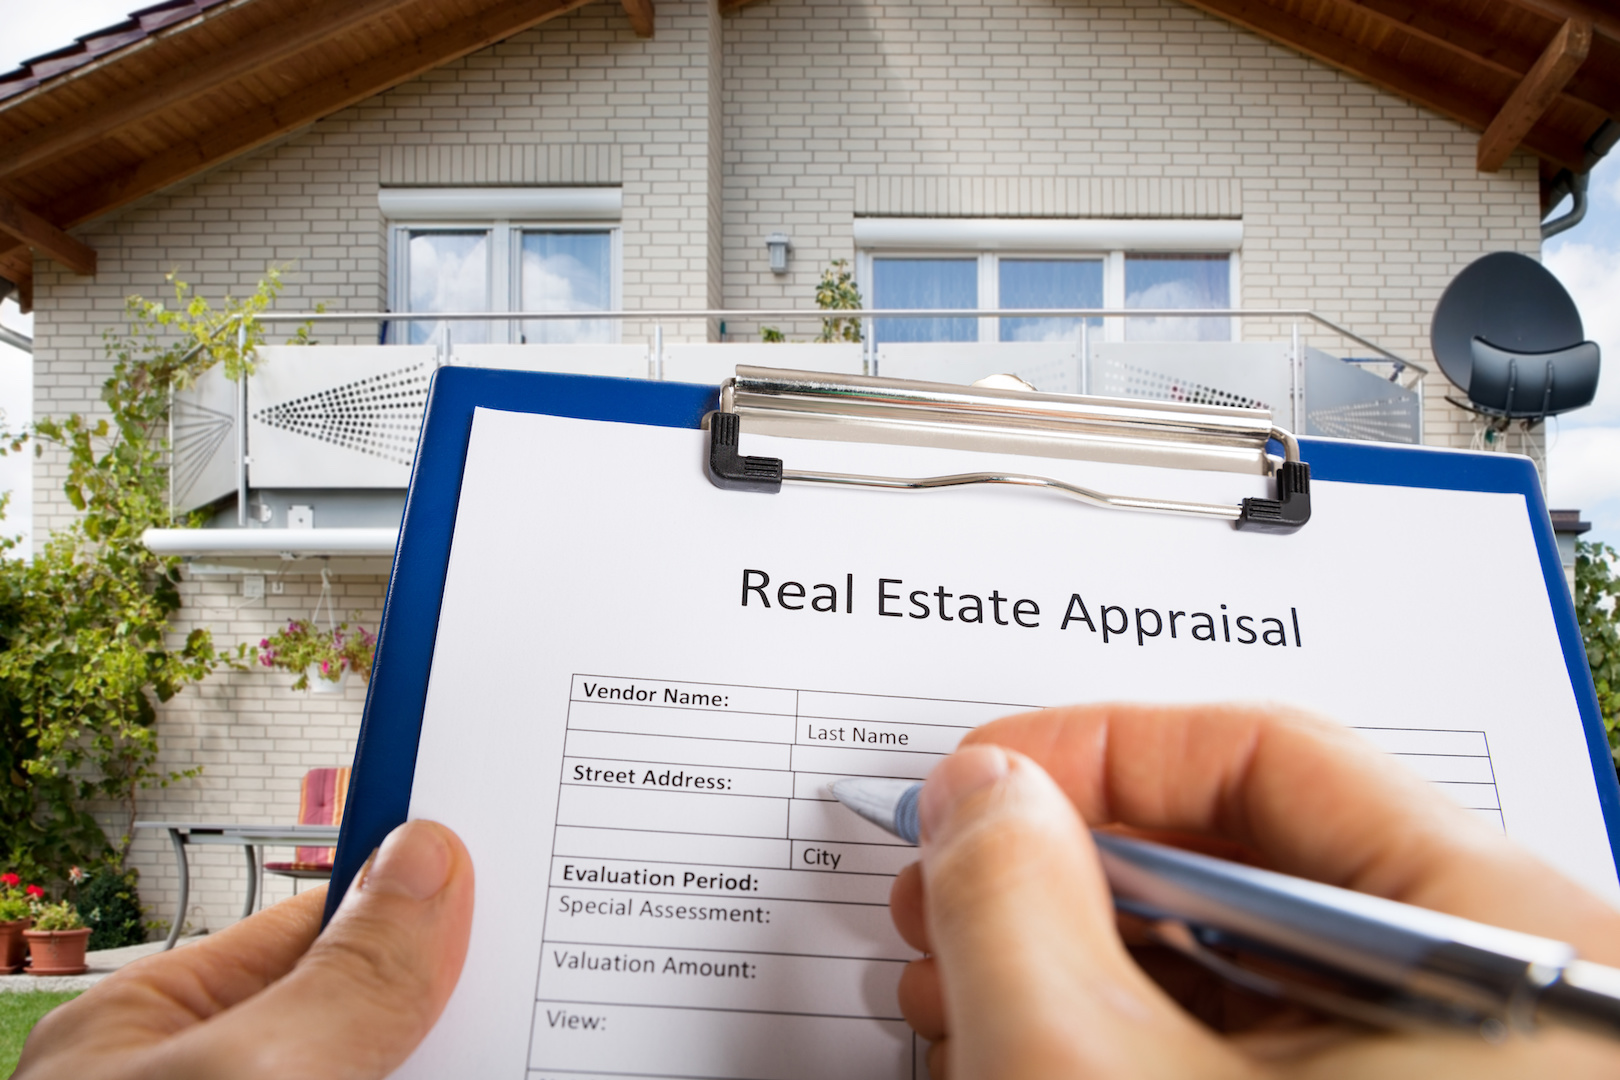 WHAT TO DO WHEN YOUR REAL ESTATE TRANSACTION DEPENDS ON THE APPRAISAL